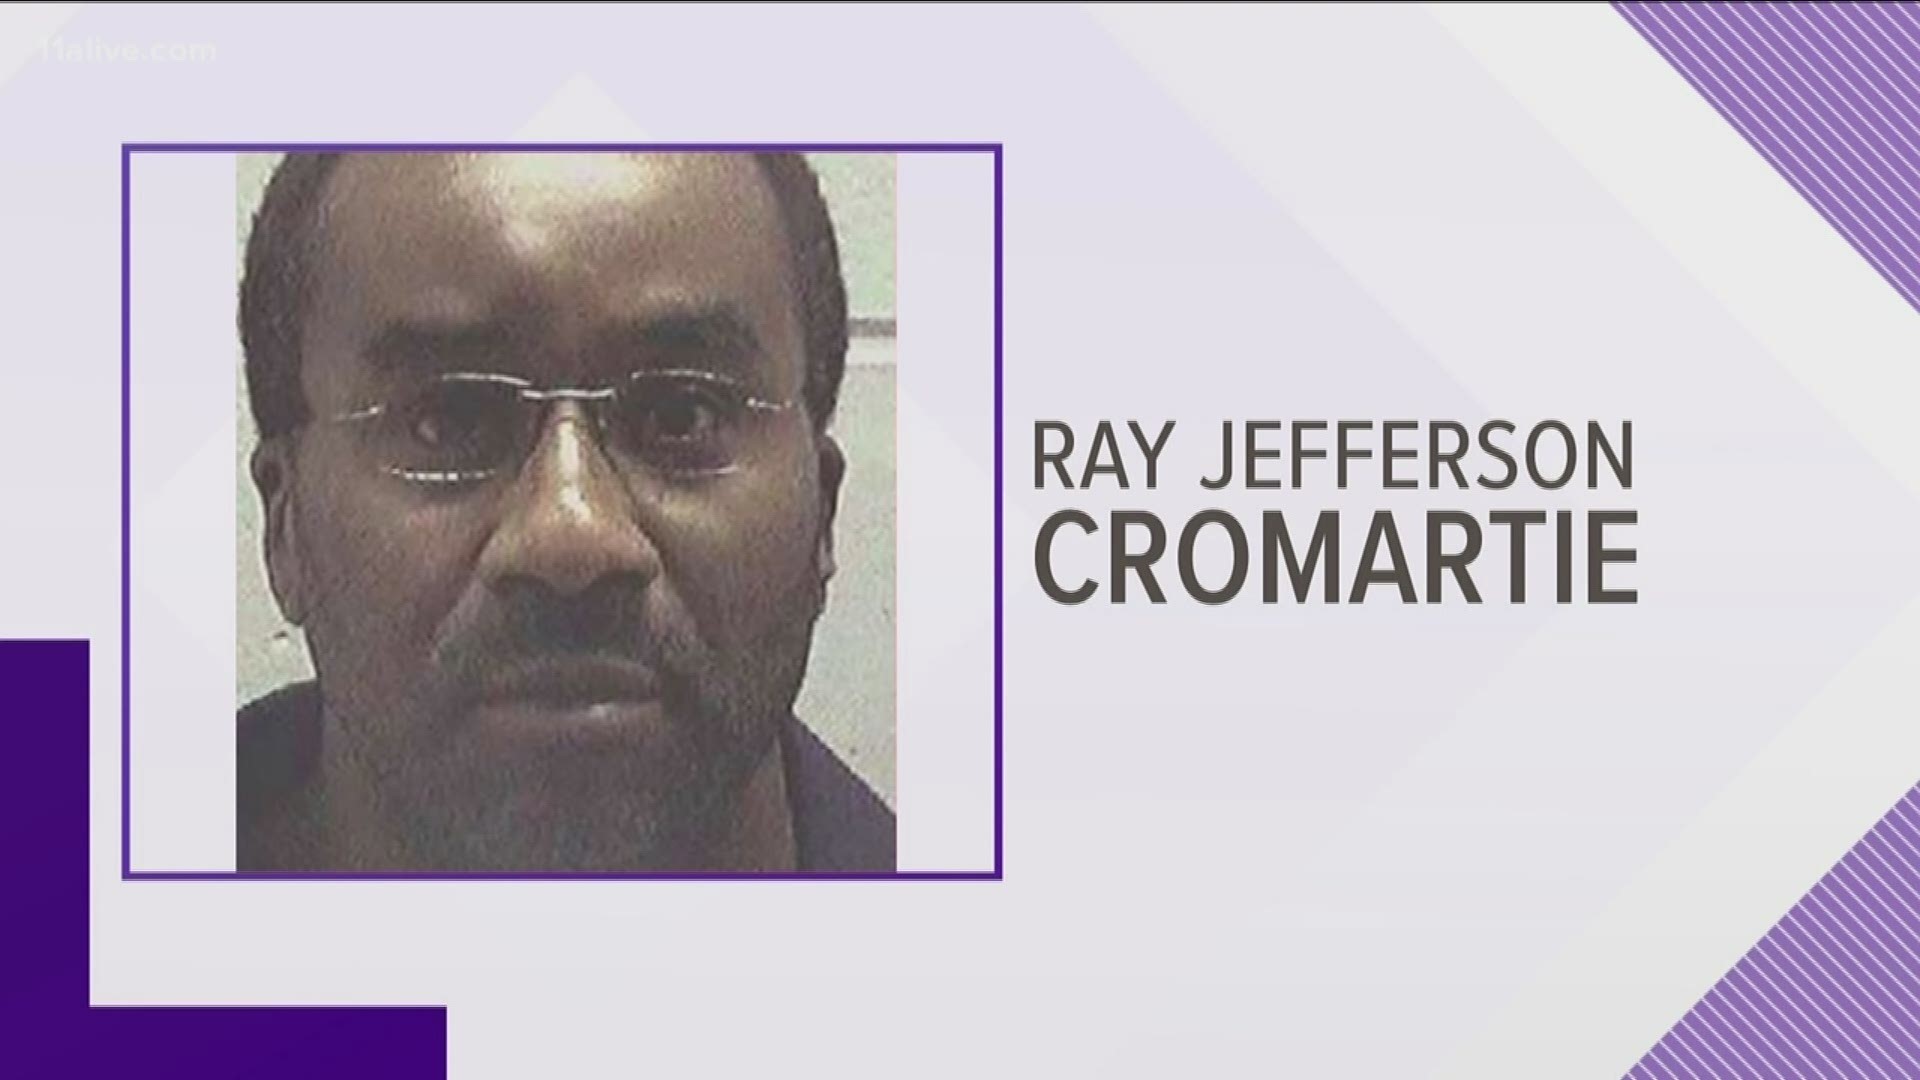 Ray Jefferson Cromartie was originally scheduled for execution on Oct. 30 but a stay of execution pushed back the date.